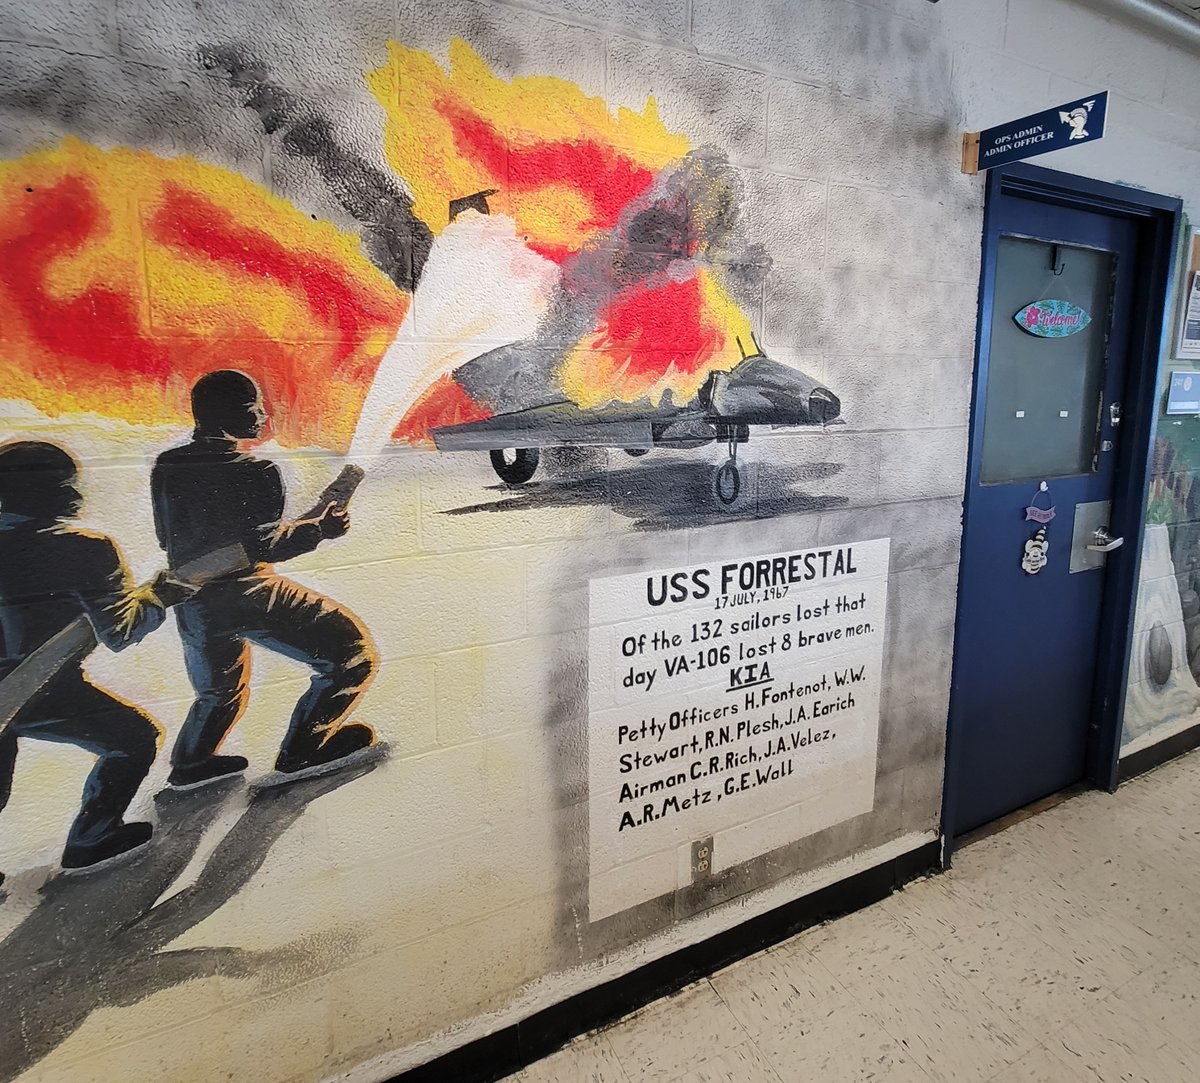 Hangar hallways of the Gladiators of Strike Fighter Squadron 106 #VFA106 at Naval Air Station Oceana VA feature artwork marking achievements and risks in the squadrons history. 106 is the East Coast Fleet Replacement Squadron with well over 60 F/A-18E and F Super Hornets assigned